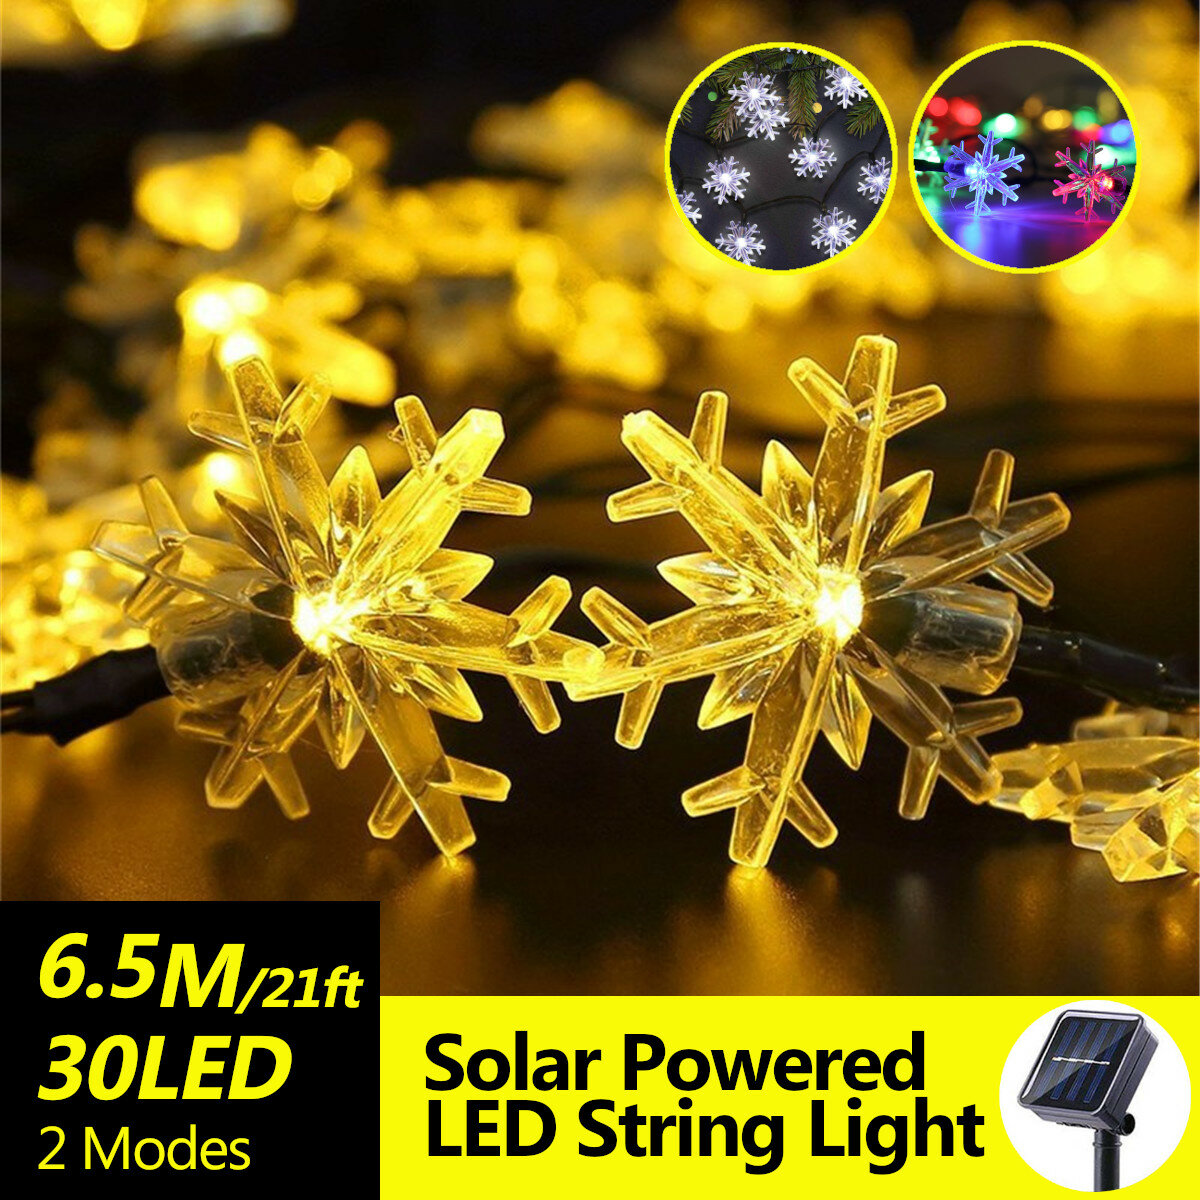 

6.5M Solar Powered Snowflake 30LED String Light Waterproof Outdoor Christmas Home Garden Party Decorative Lamp